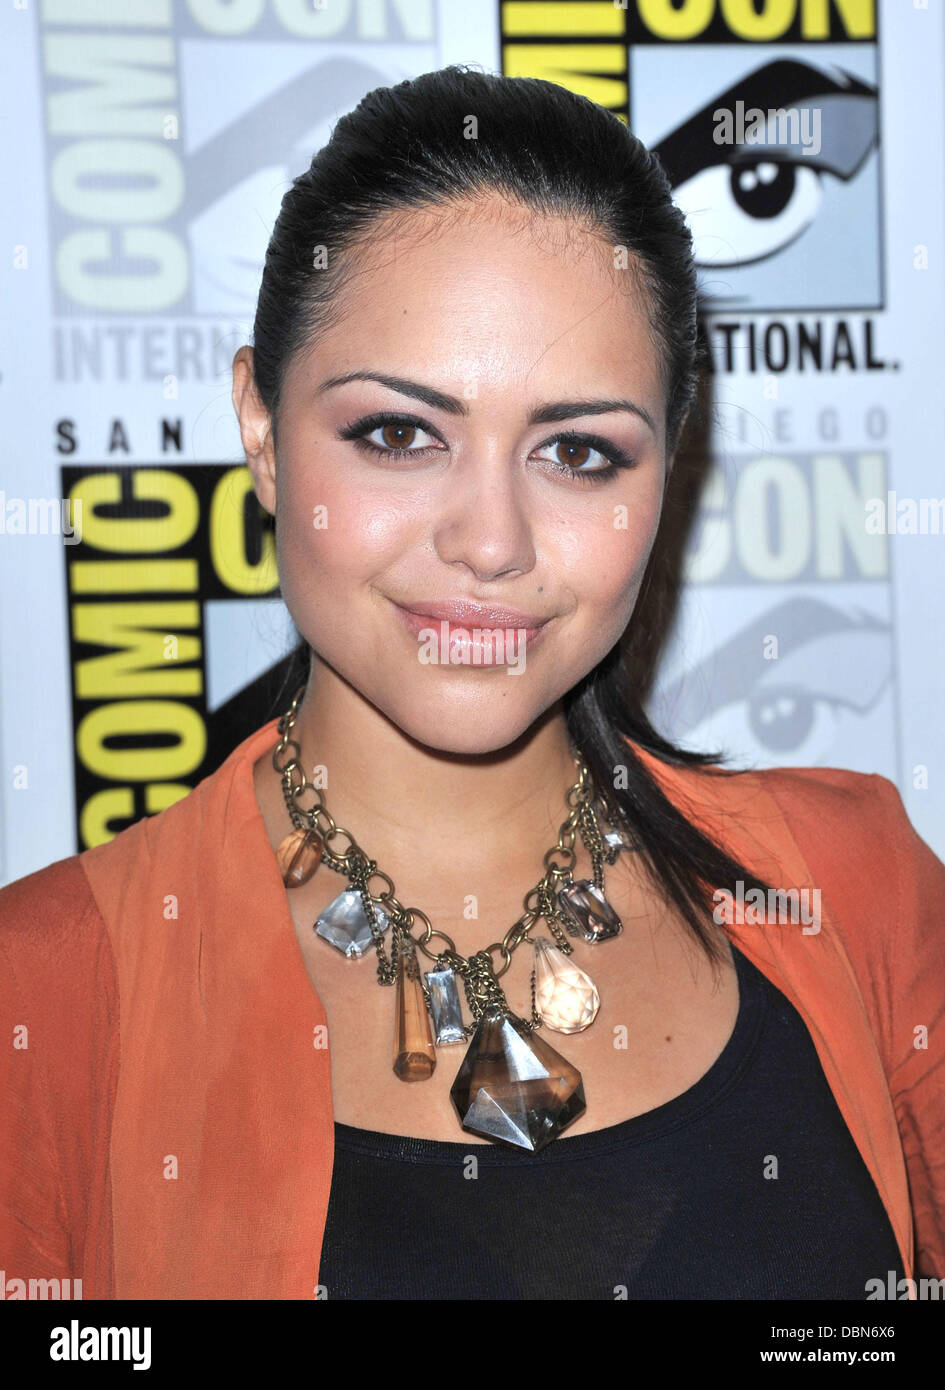 Alyssa Diaz 2011 Comic-Con Convention - Day 2 - 'The Nine Lives of Chloe King' - Press Conference Los Angeles, California - 22.07.11 Stock Photo